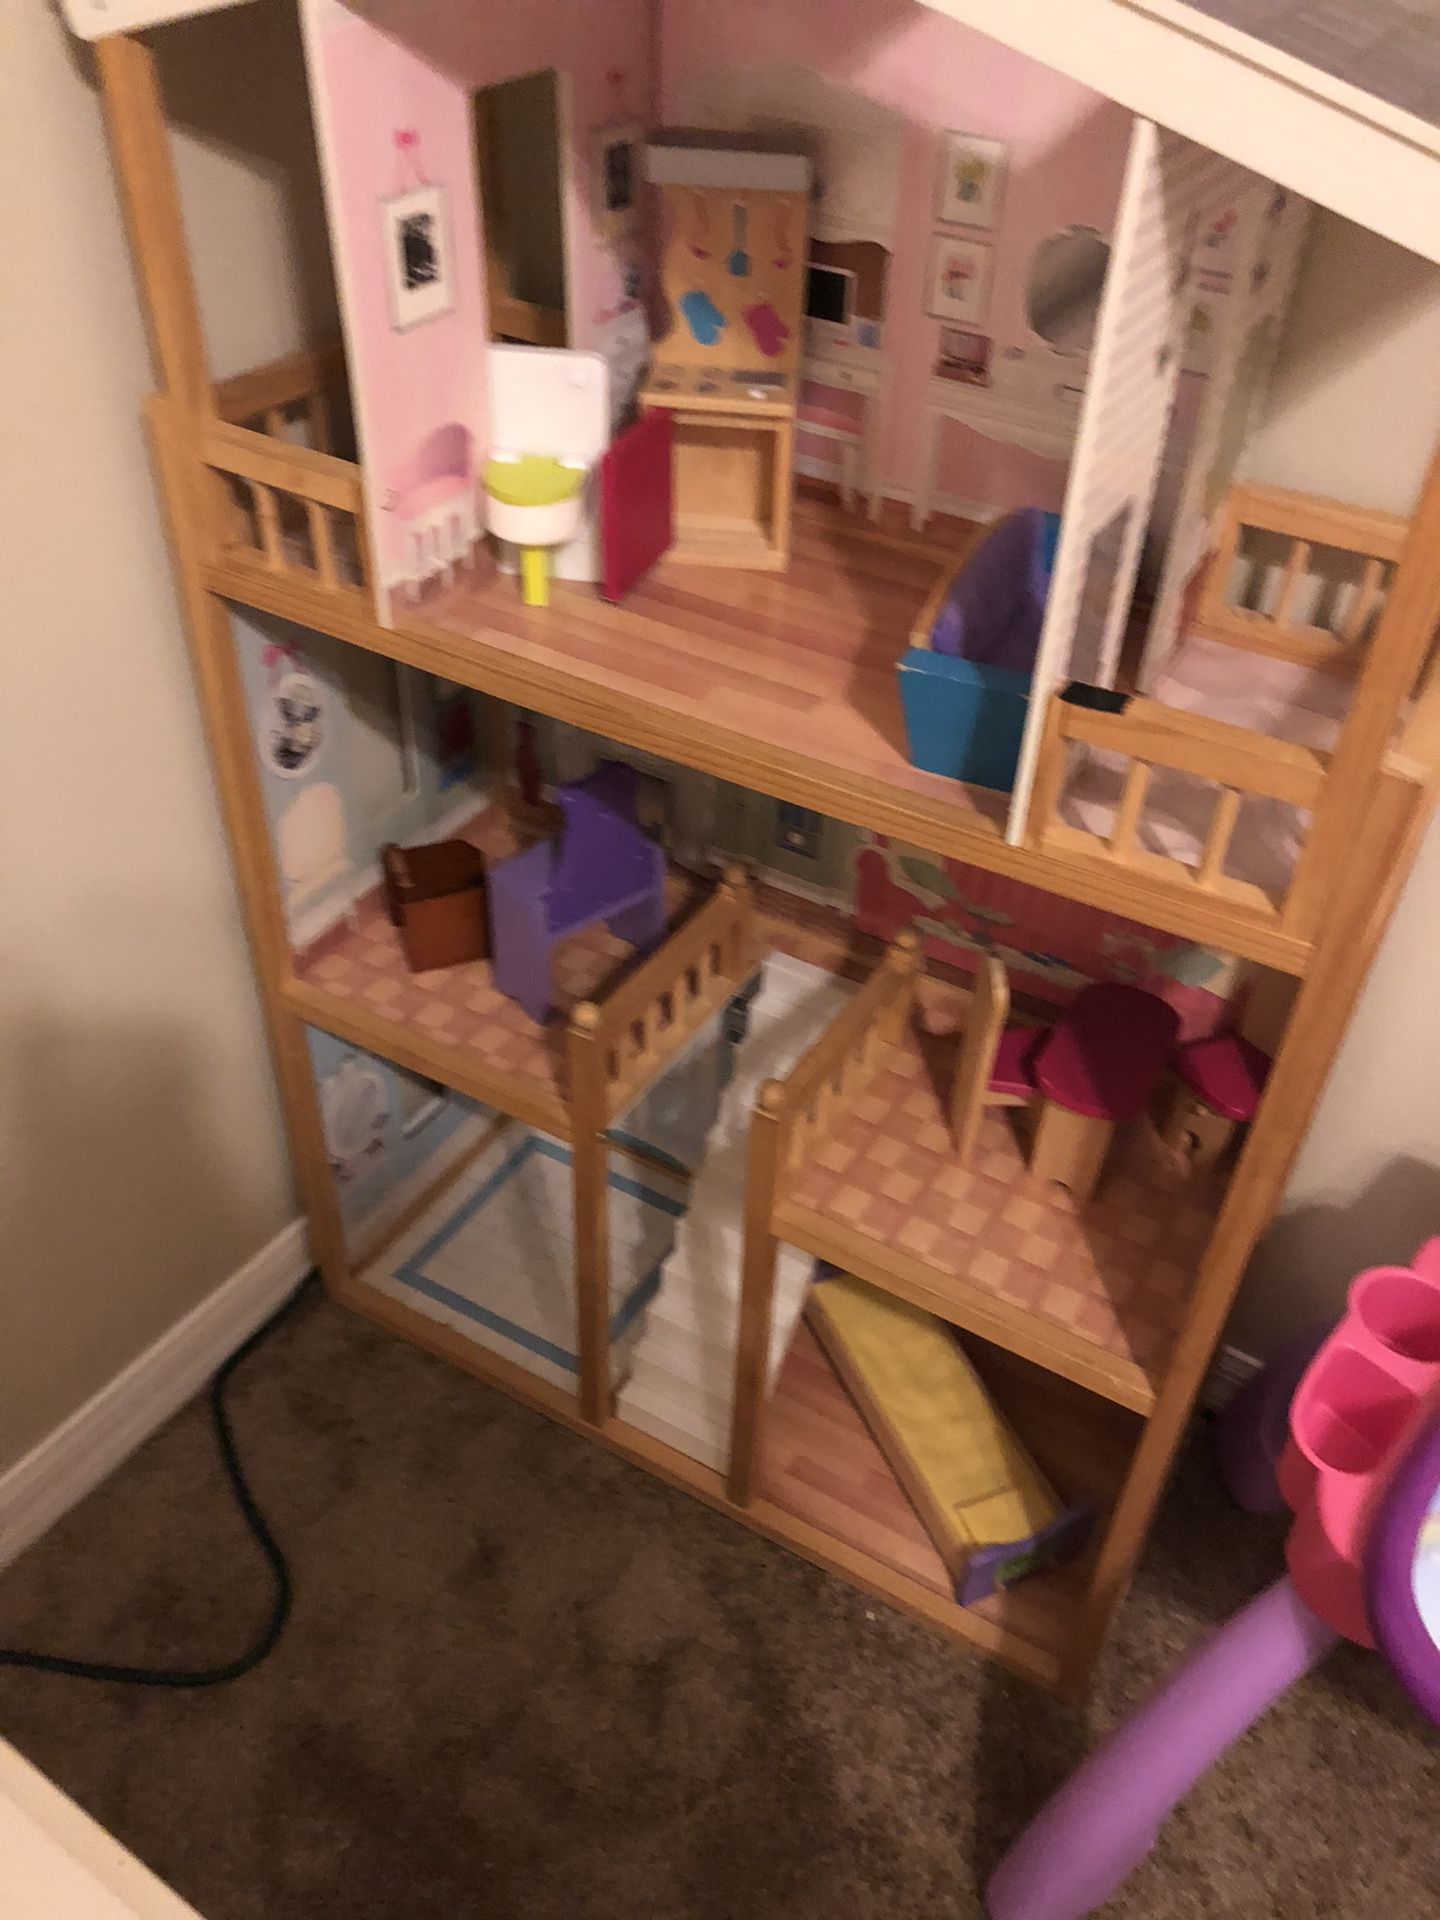 Life size doll house